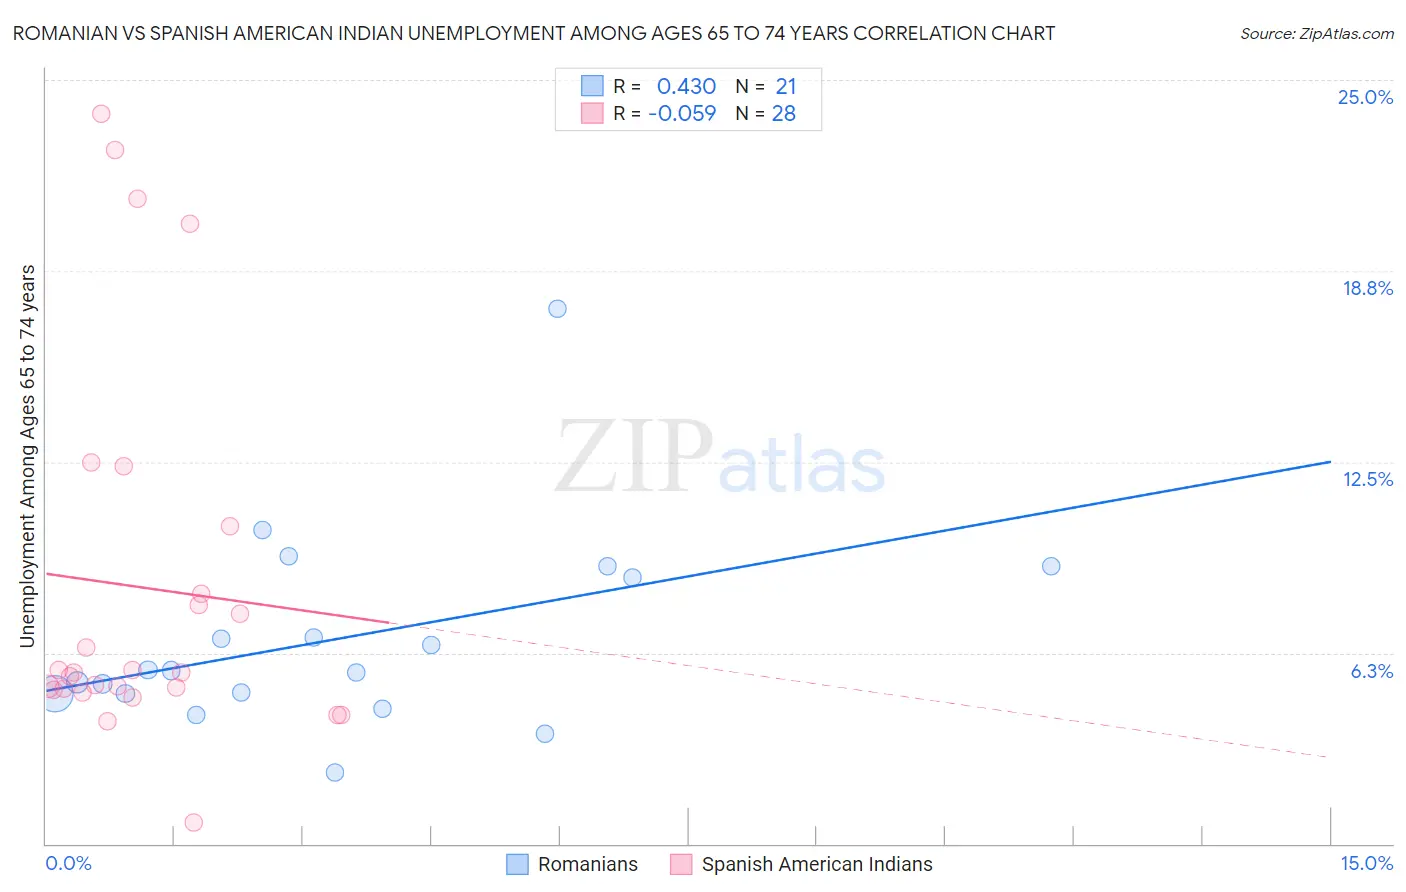 Romanian vs Spanish American Indian Unemployment Among Ages 65 to 74 years